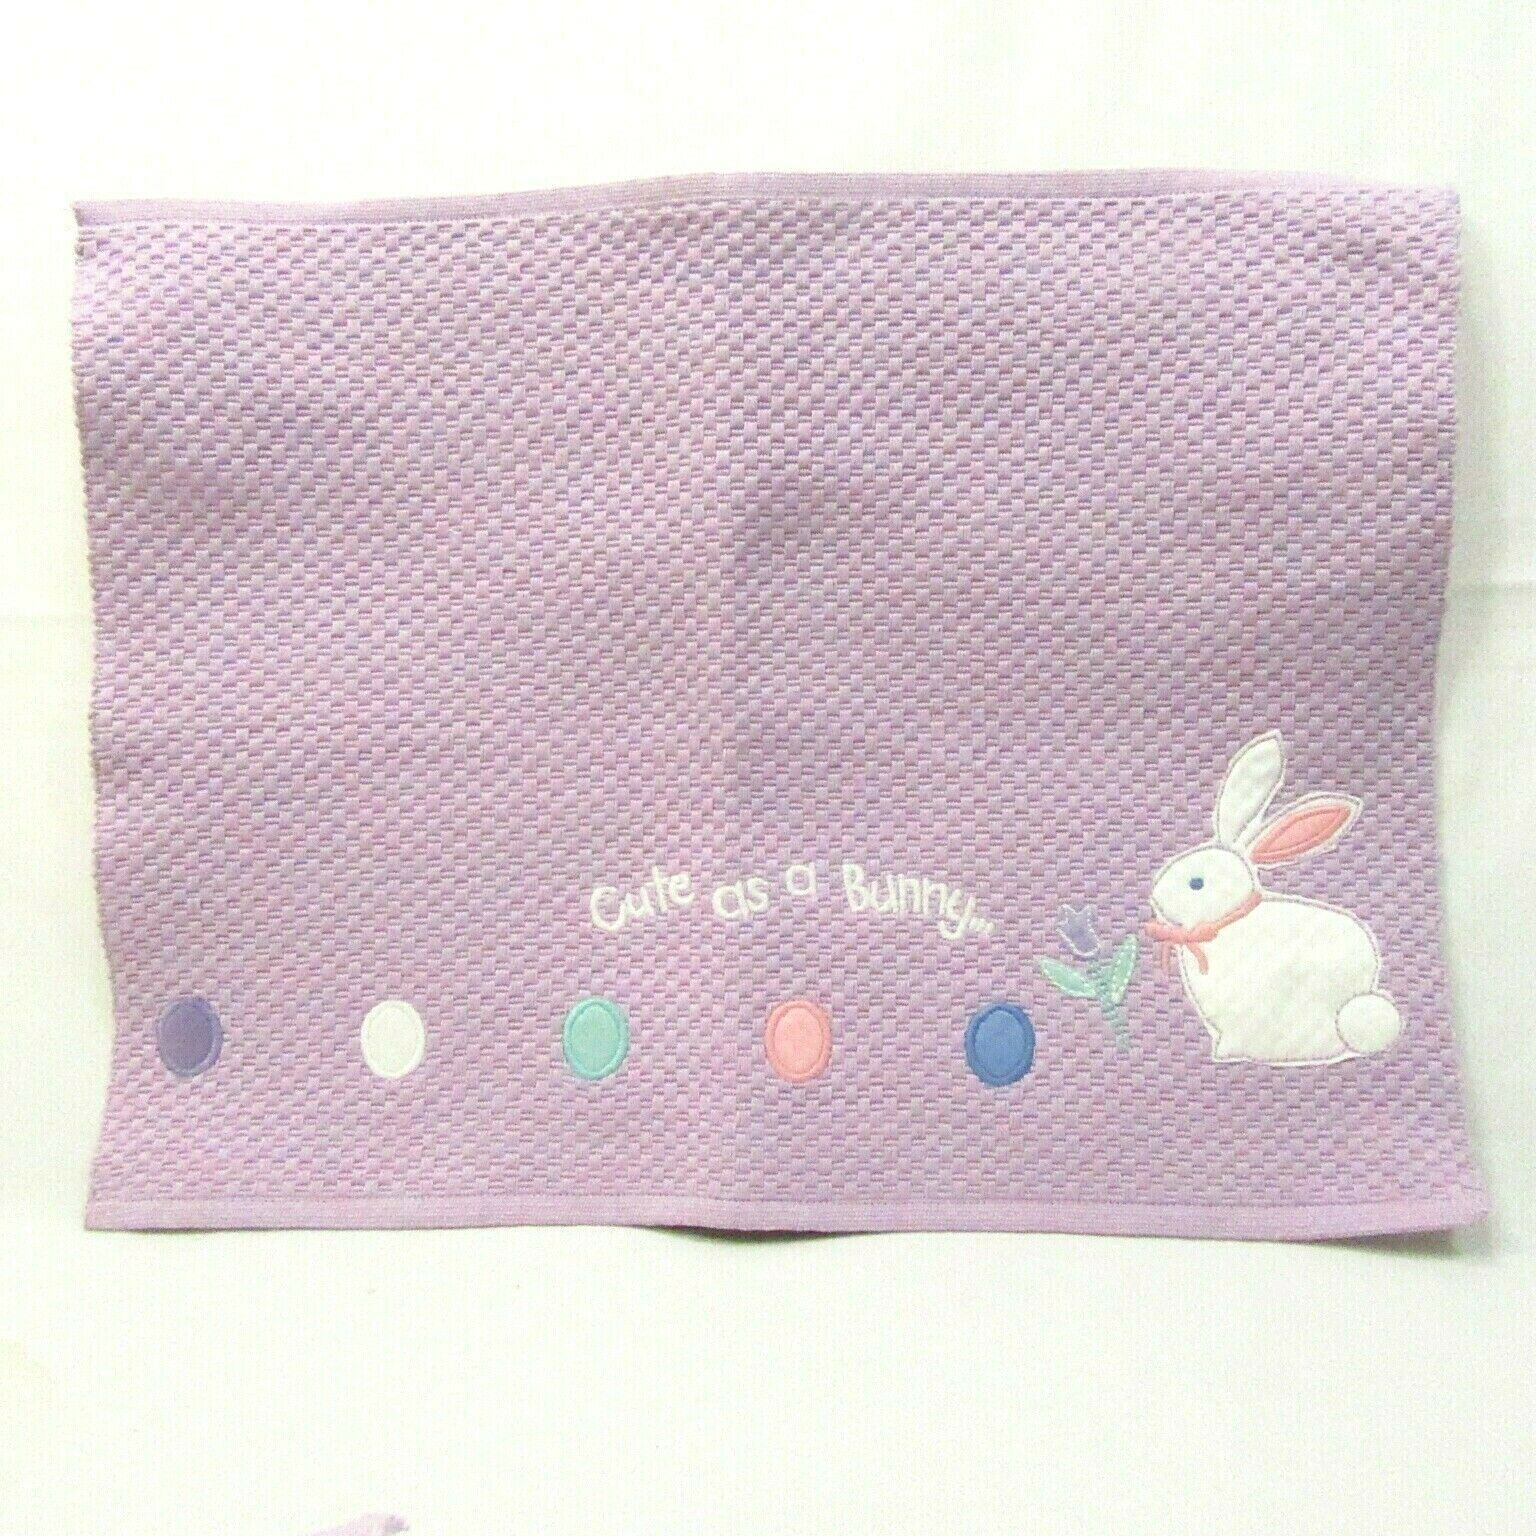 Primary image for Casual Home Cute as a Bunny Embroidered Lavender Easter 6-PC Placemat Set